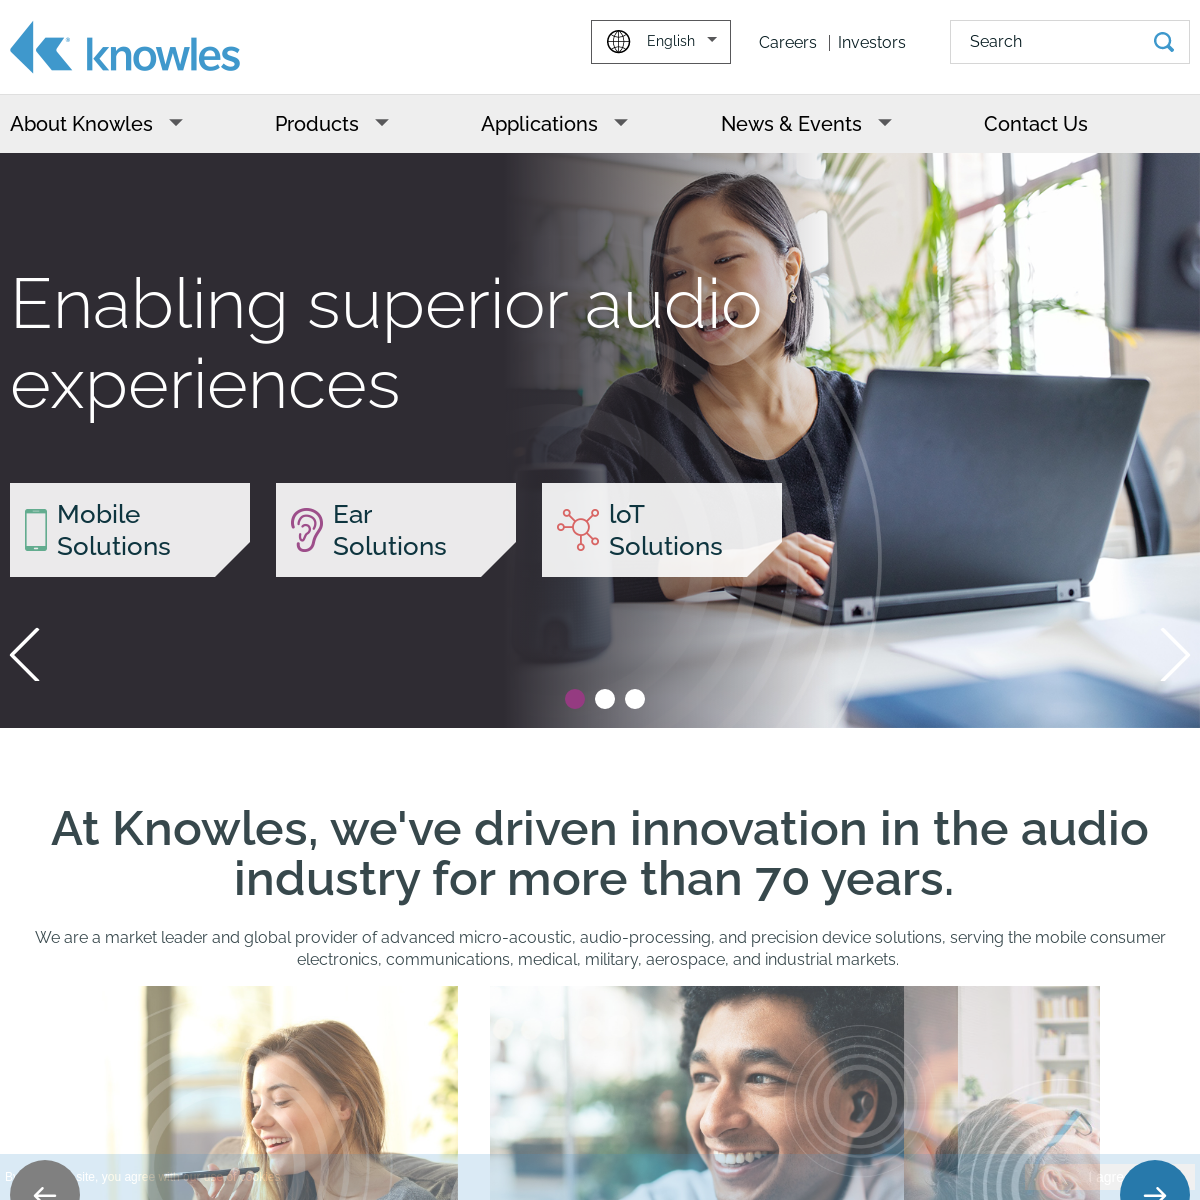 A complete backup of knowles.com